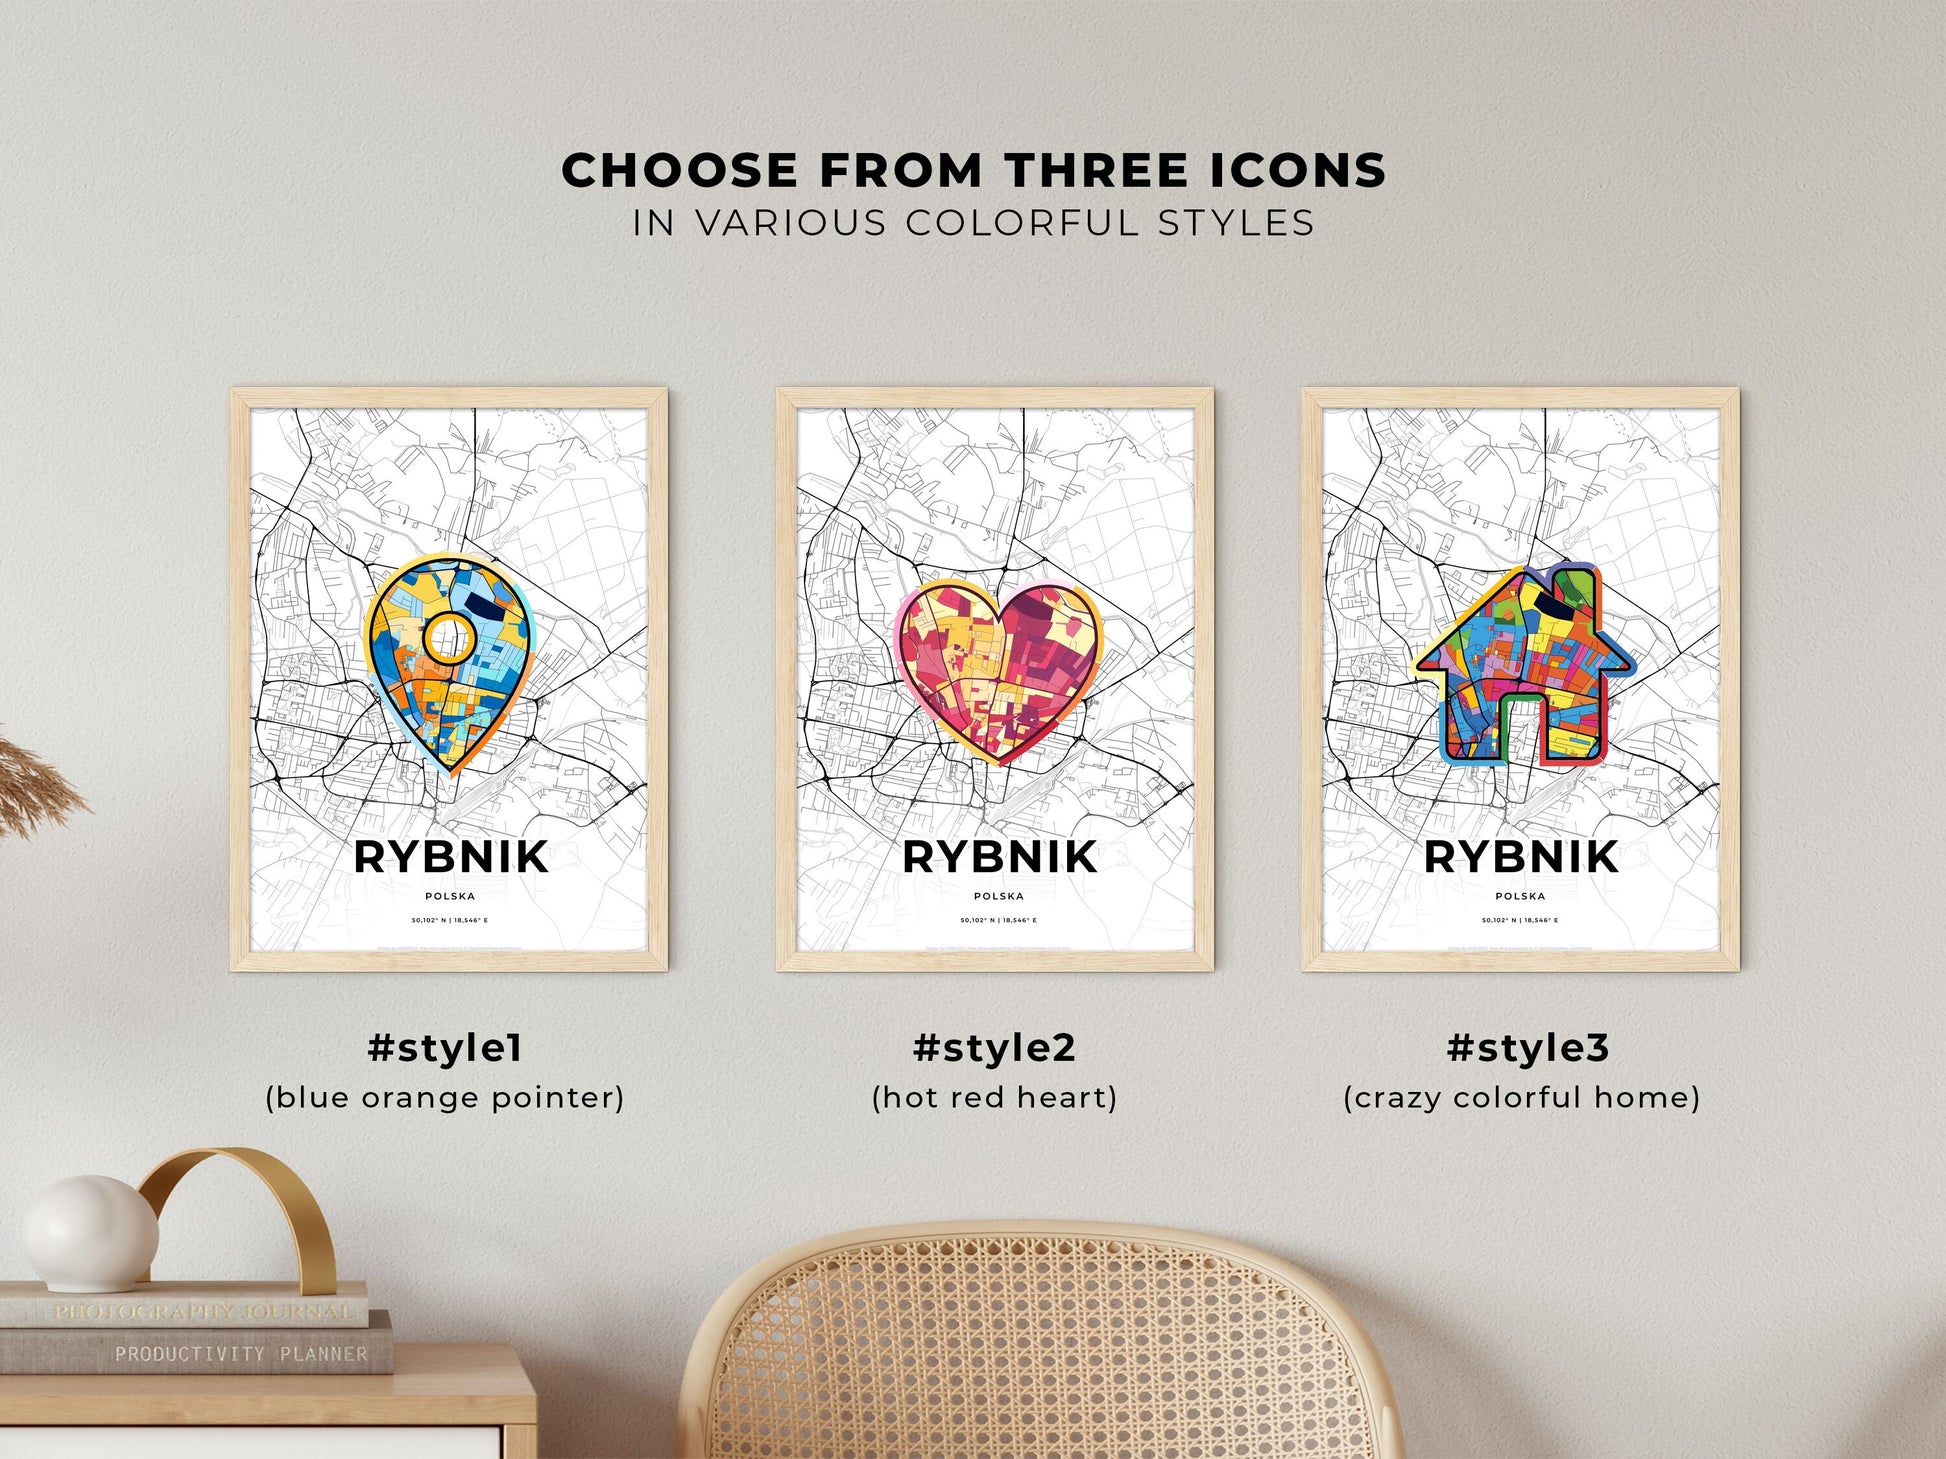 RYBNIK POLAND minimal art map with a colorful icon. Where it all began, Couple map gift.